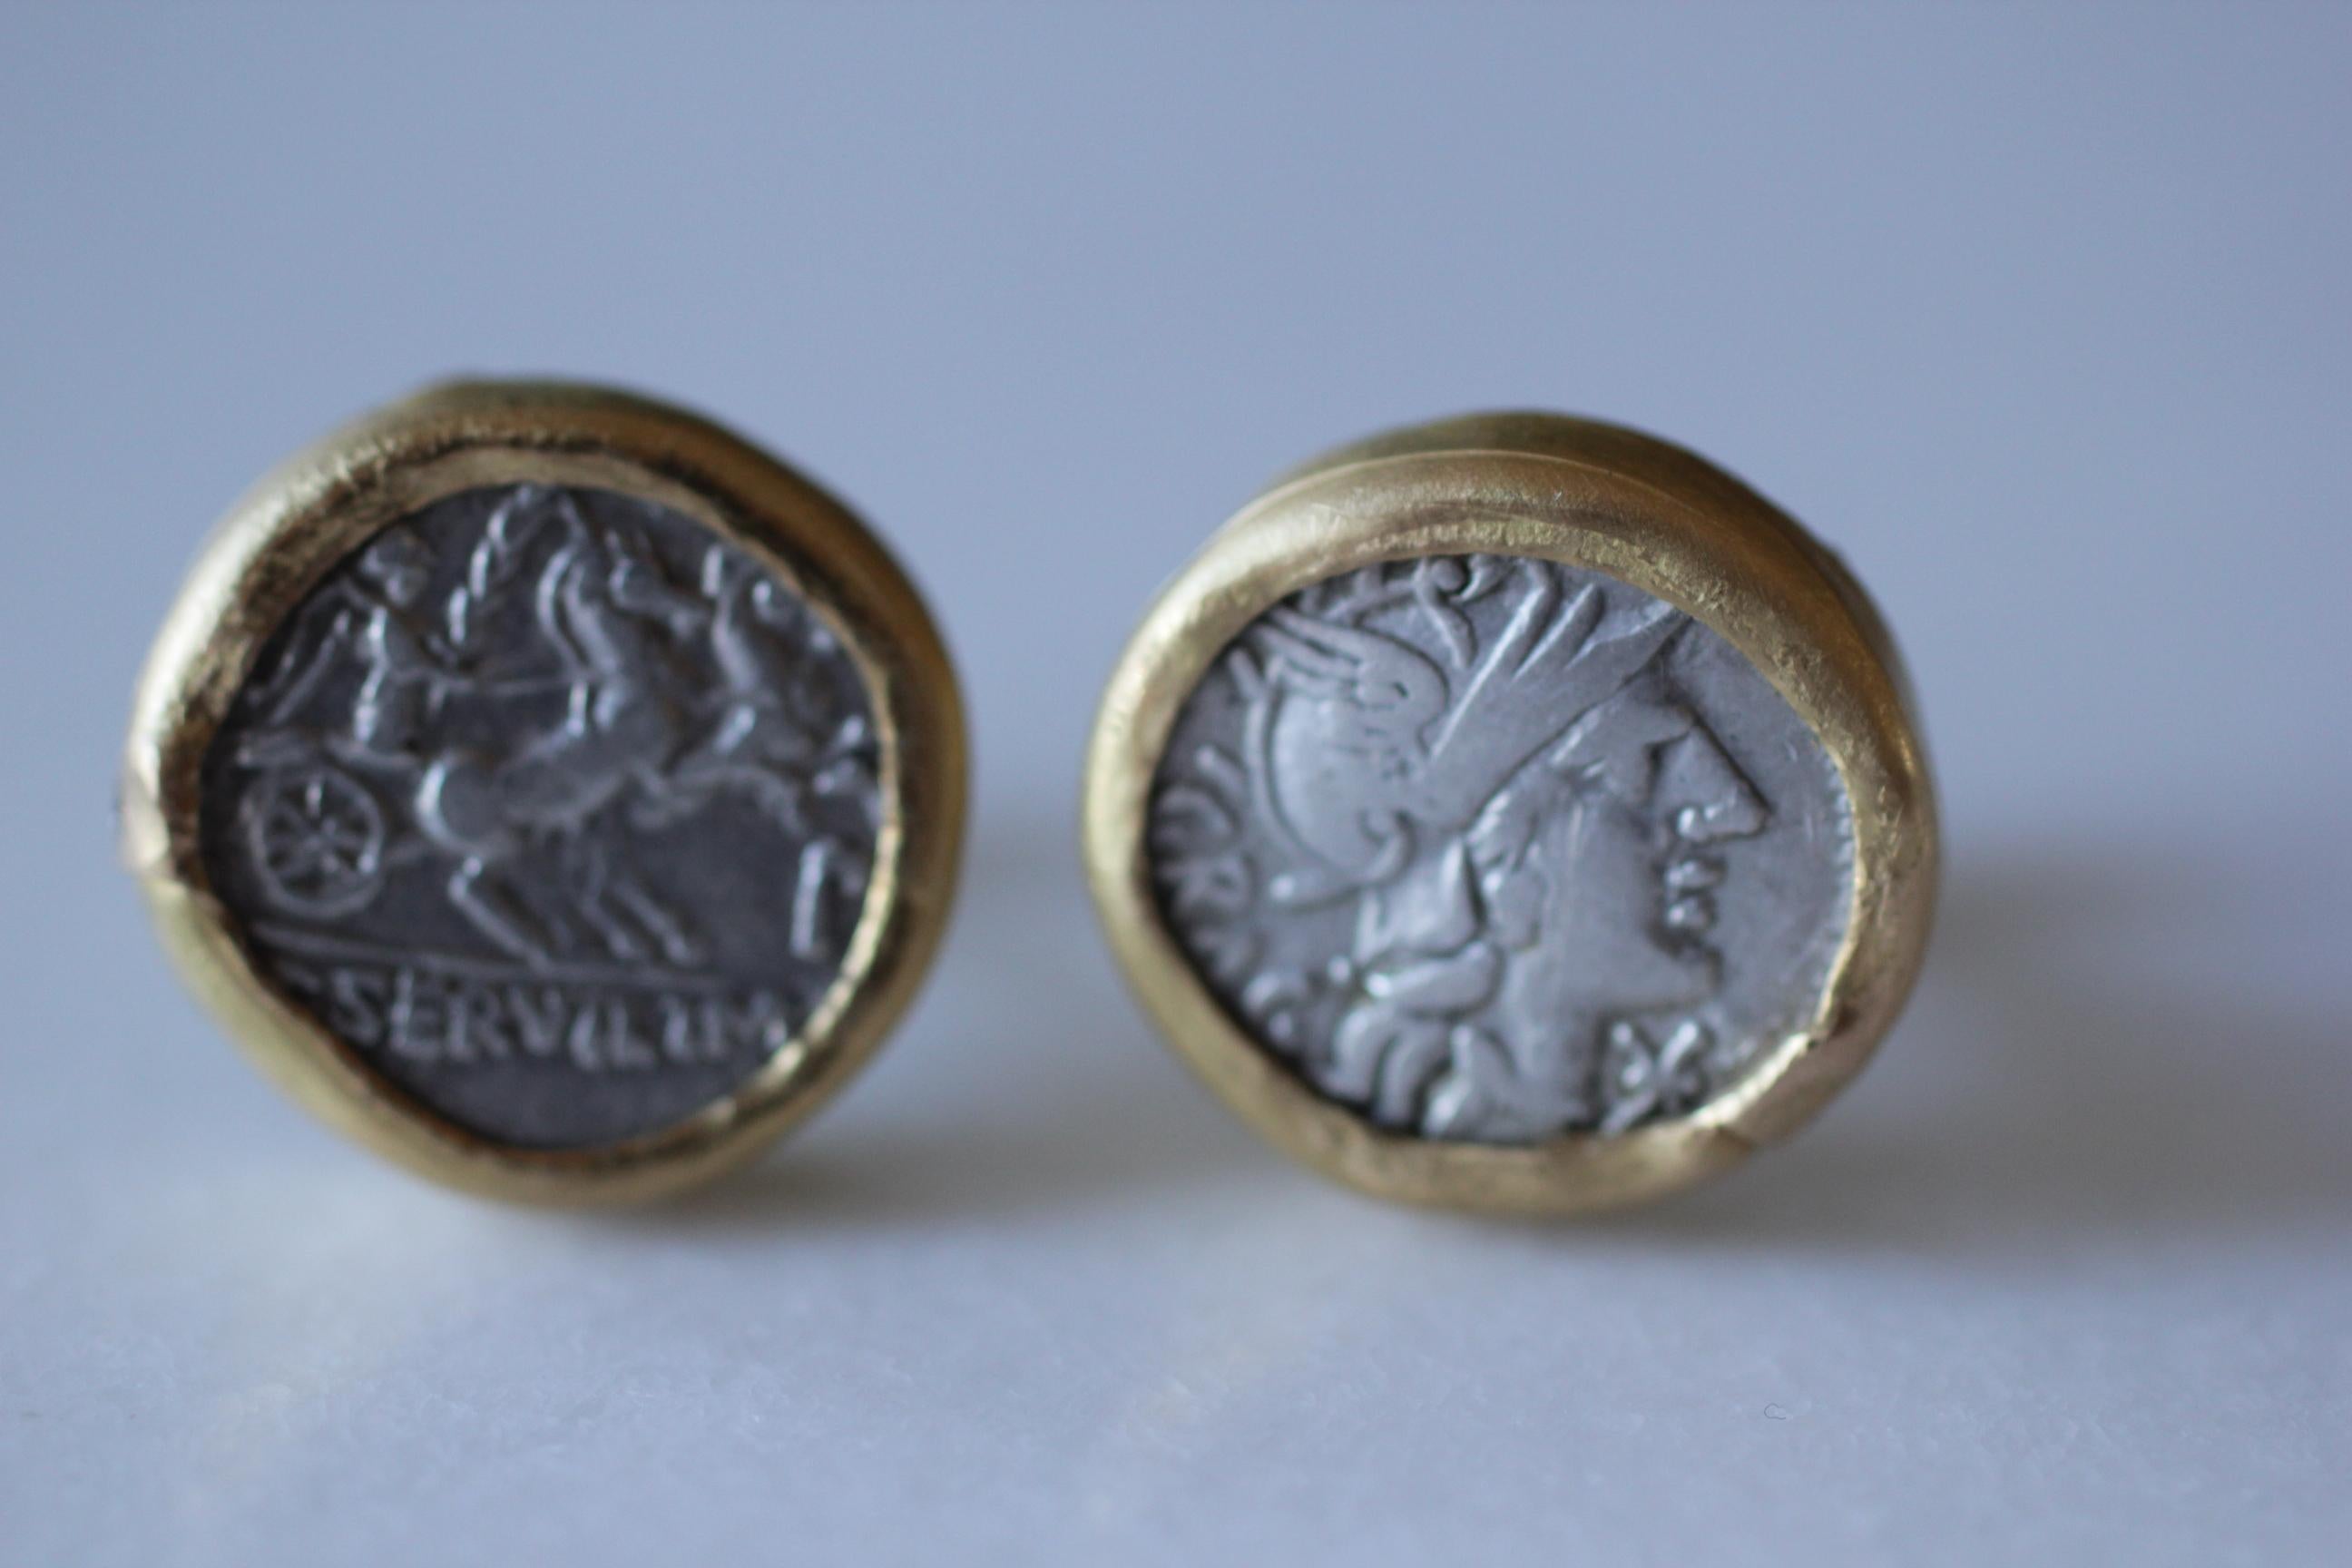 Antique 2nd Cent BC Roman coin cufflinks, set in 21k gold bezels, styled with small diamond accents. Contemporary jewelry design by AB Jewelry NYC

The inspiration for these cufflinks comes from the coins' imagery, the interpretive spirit of Modern